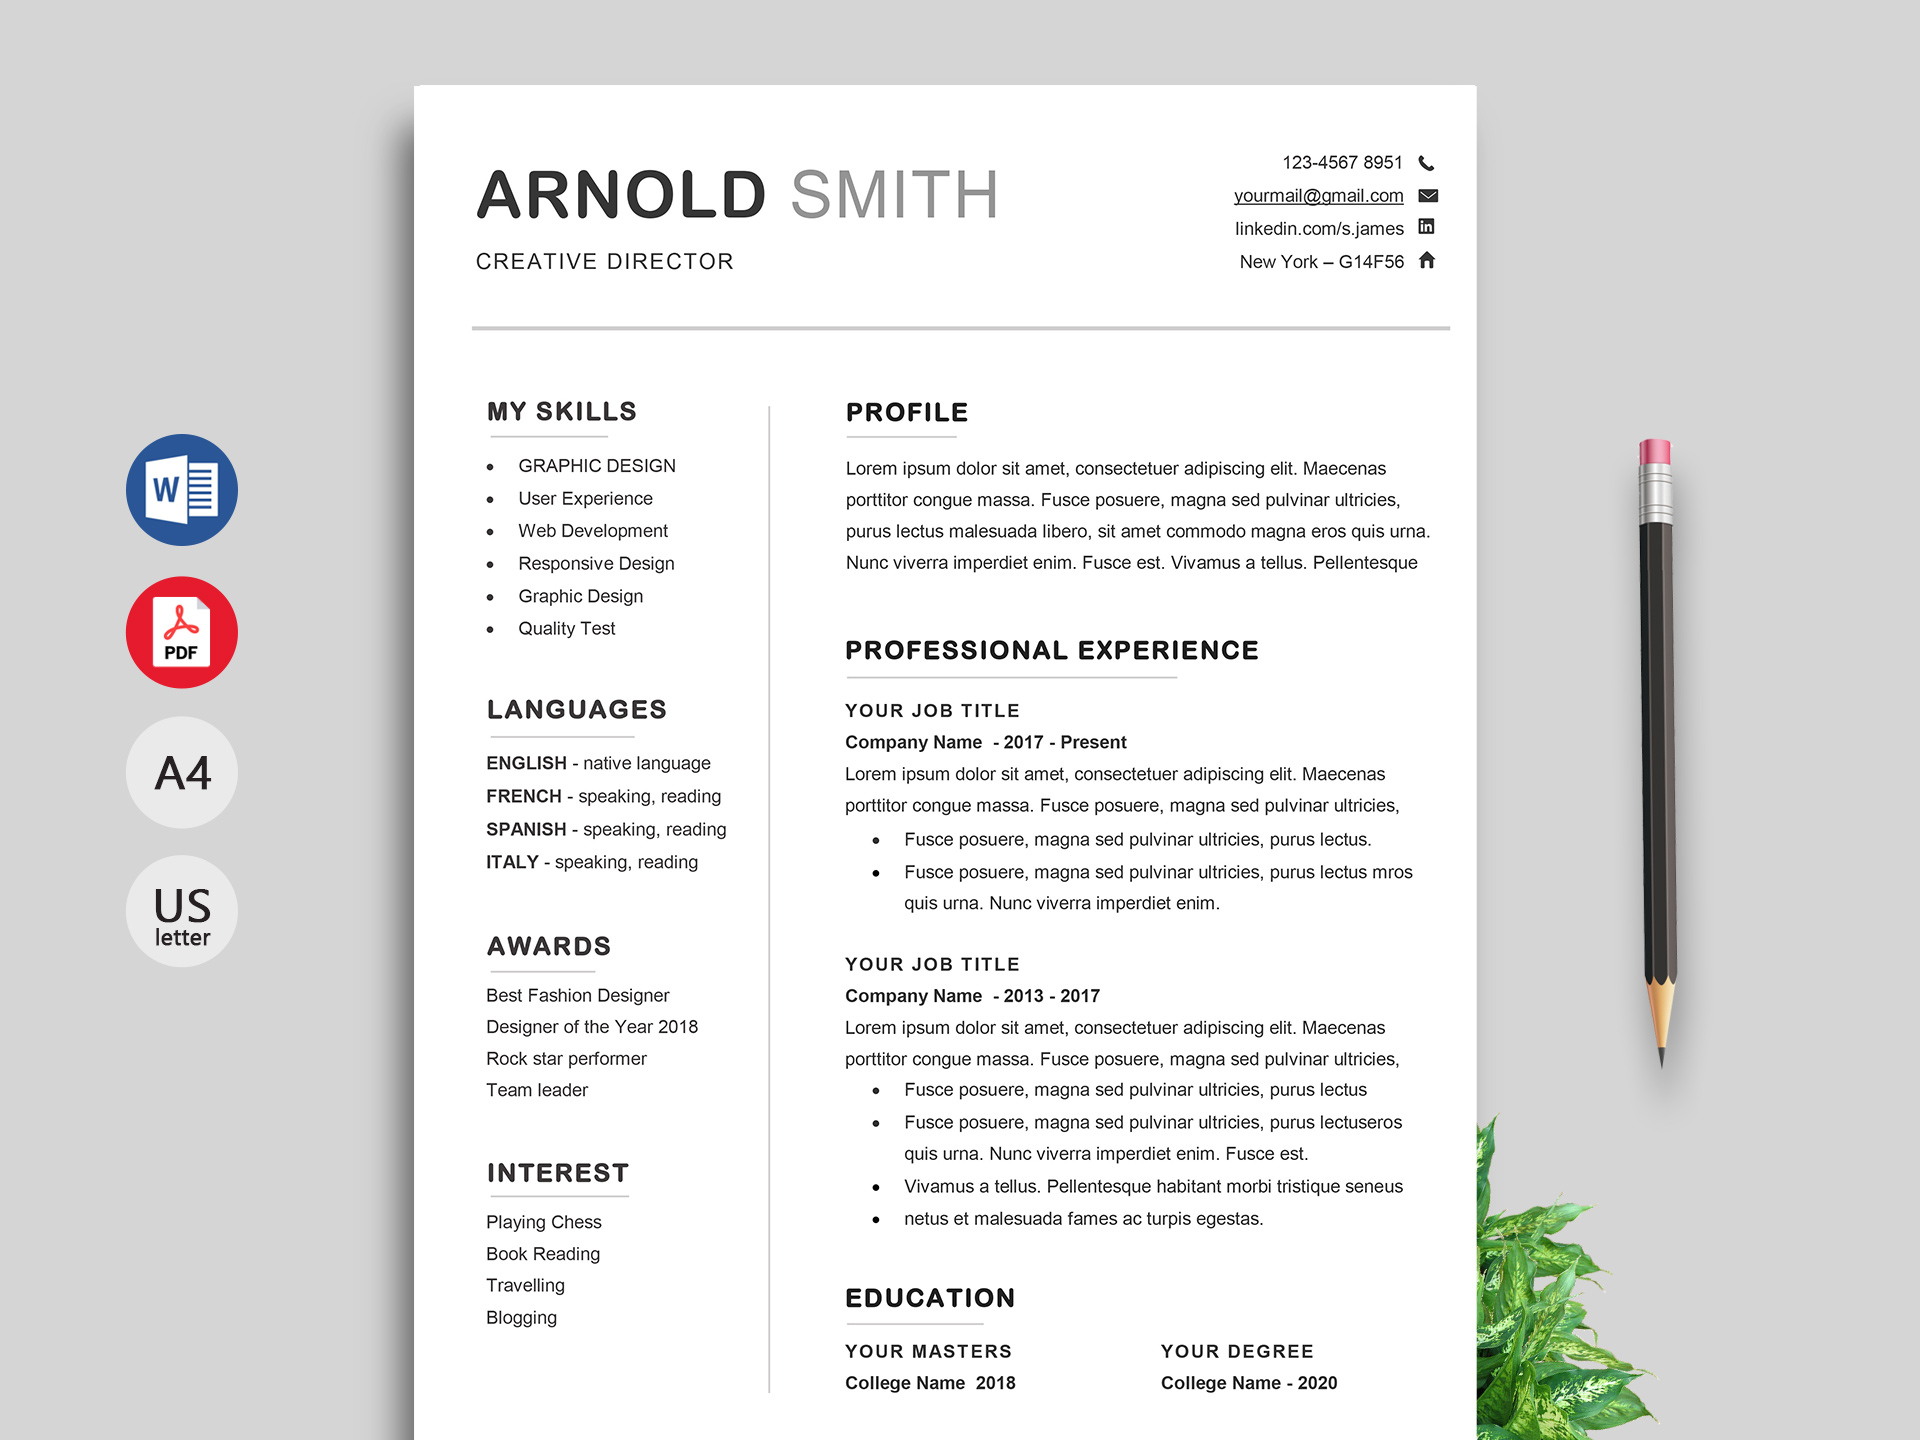 Free Resume Templates For Word Ace Word Resume Template Free Download 1 free resume templates for word|wikiresume.com